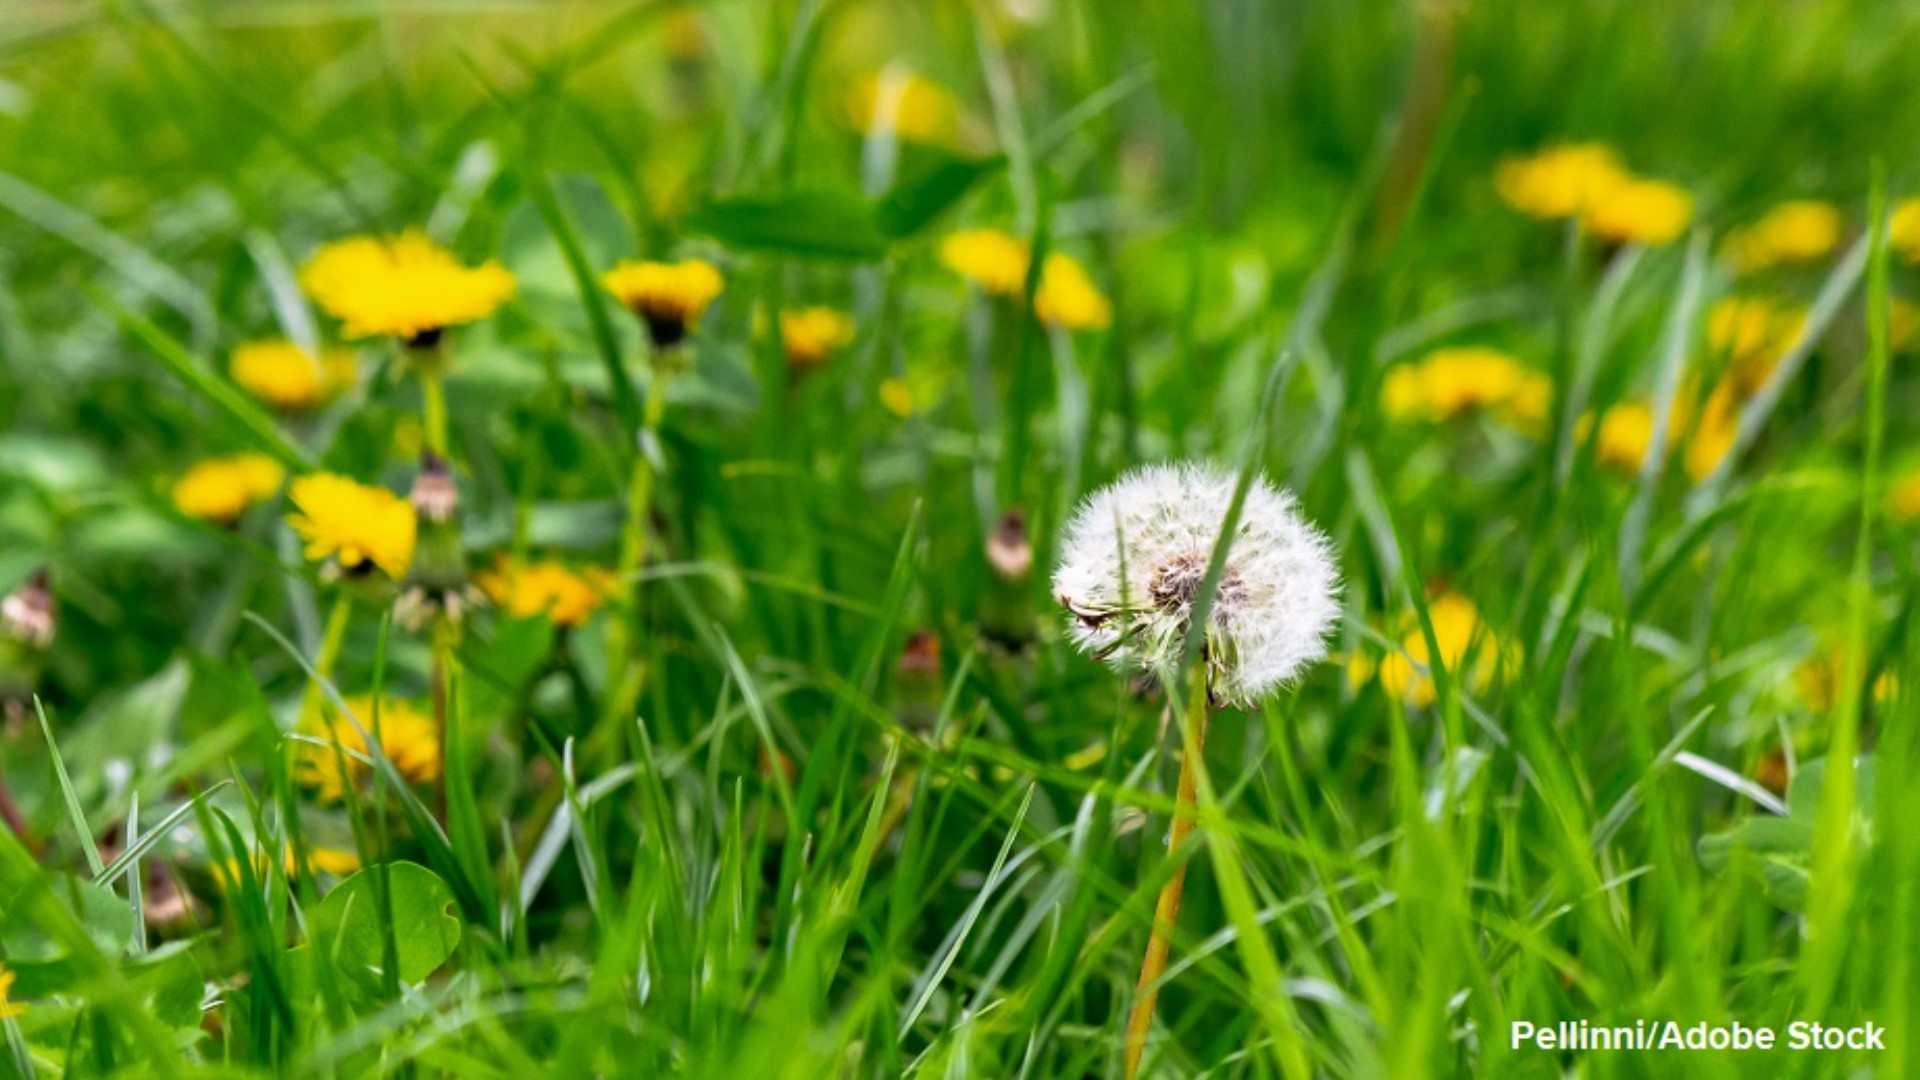 Dandelions and other weeds can be treated and pulled in the spring.